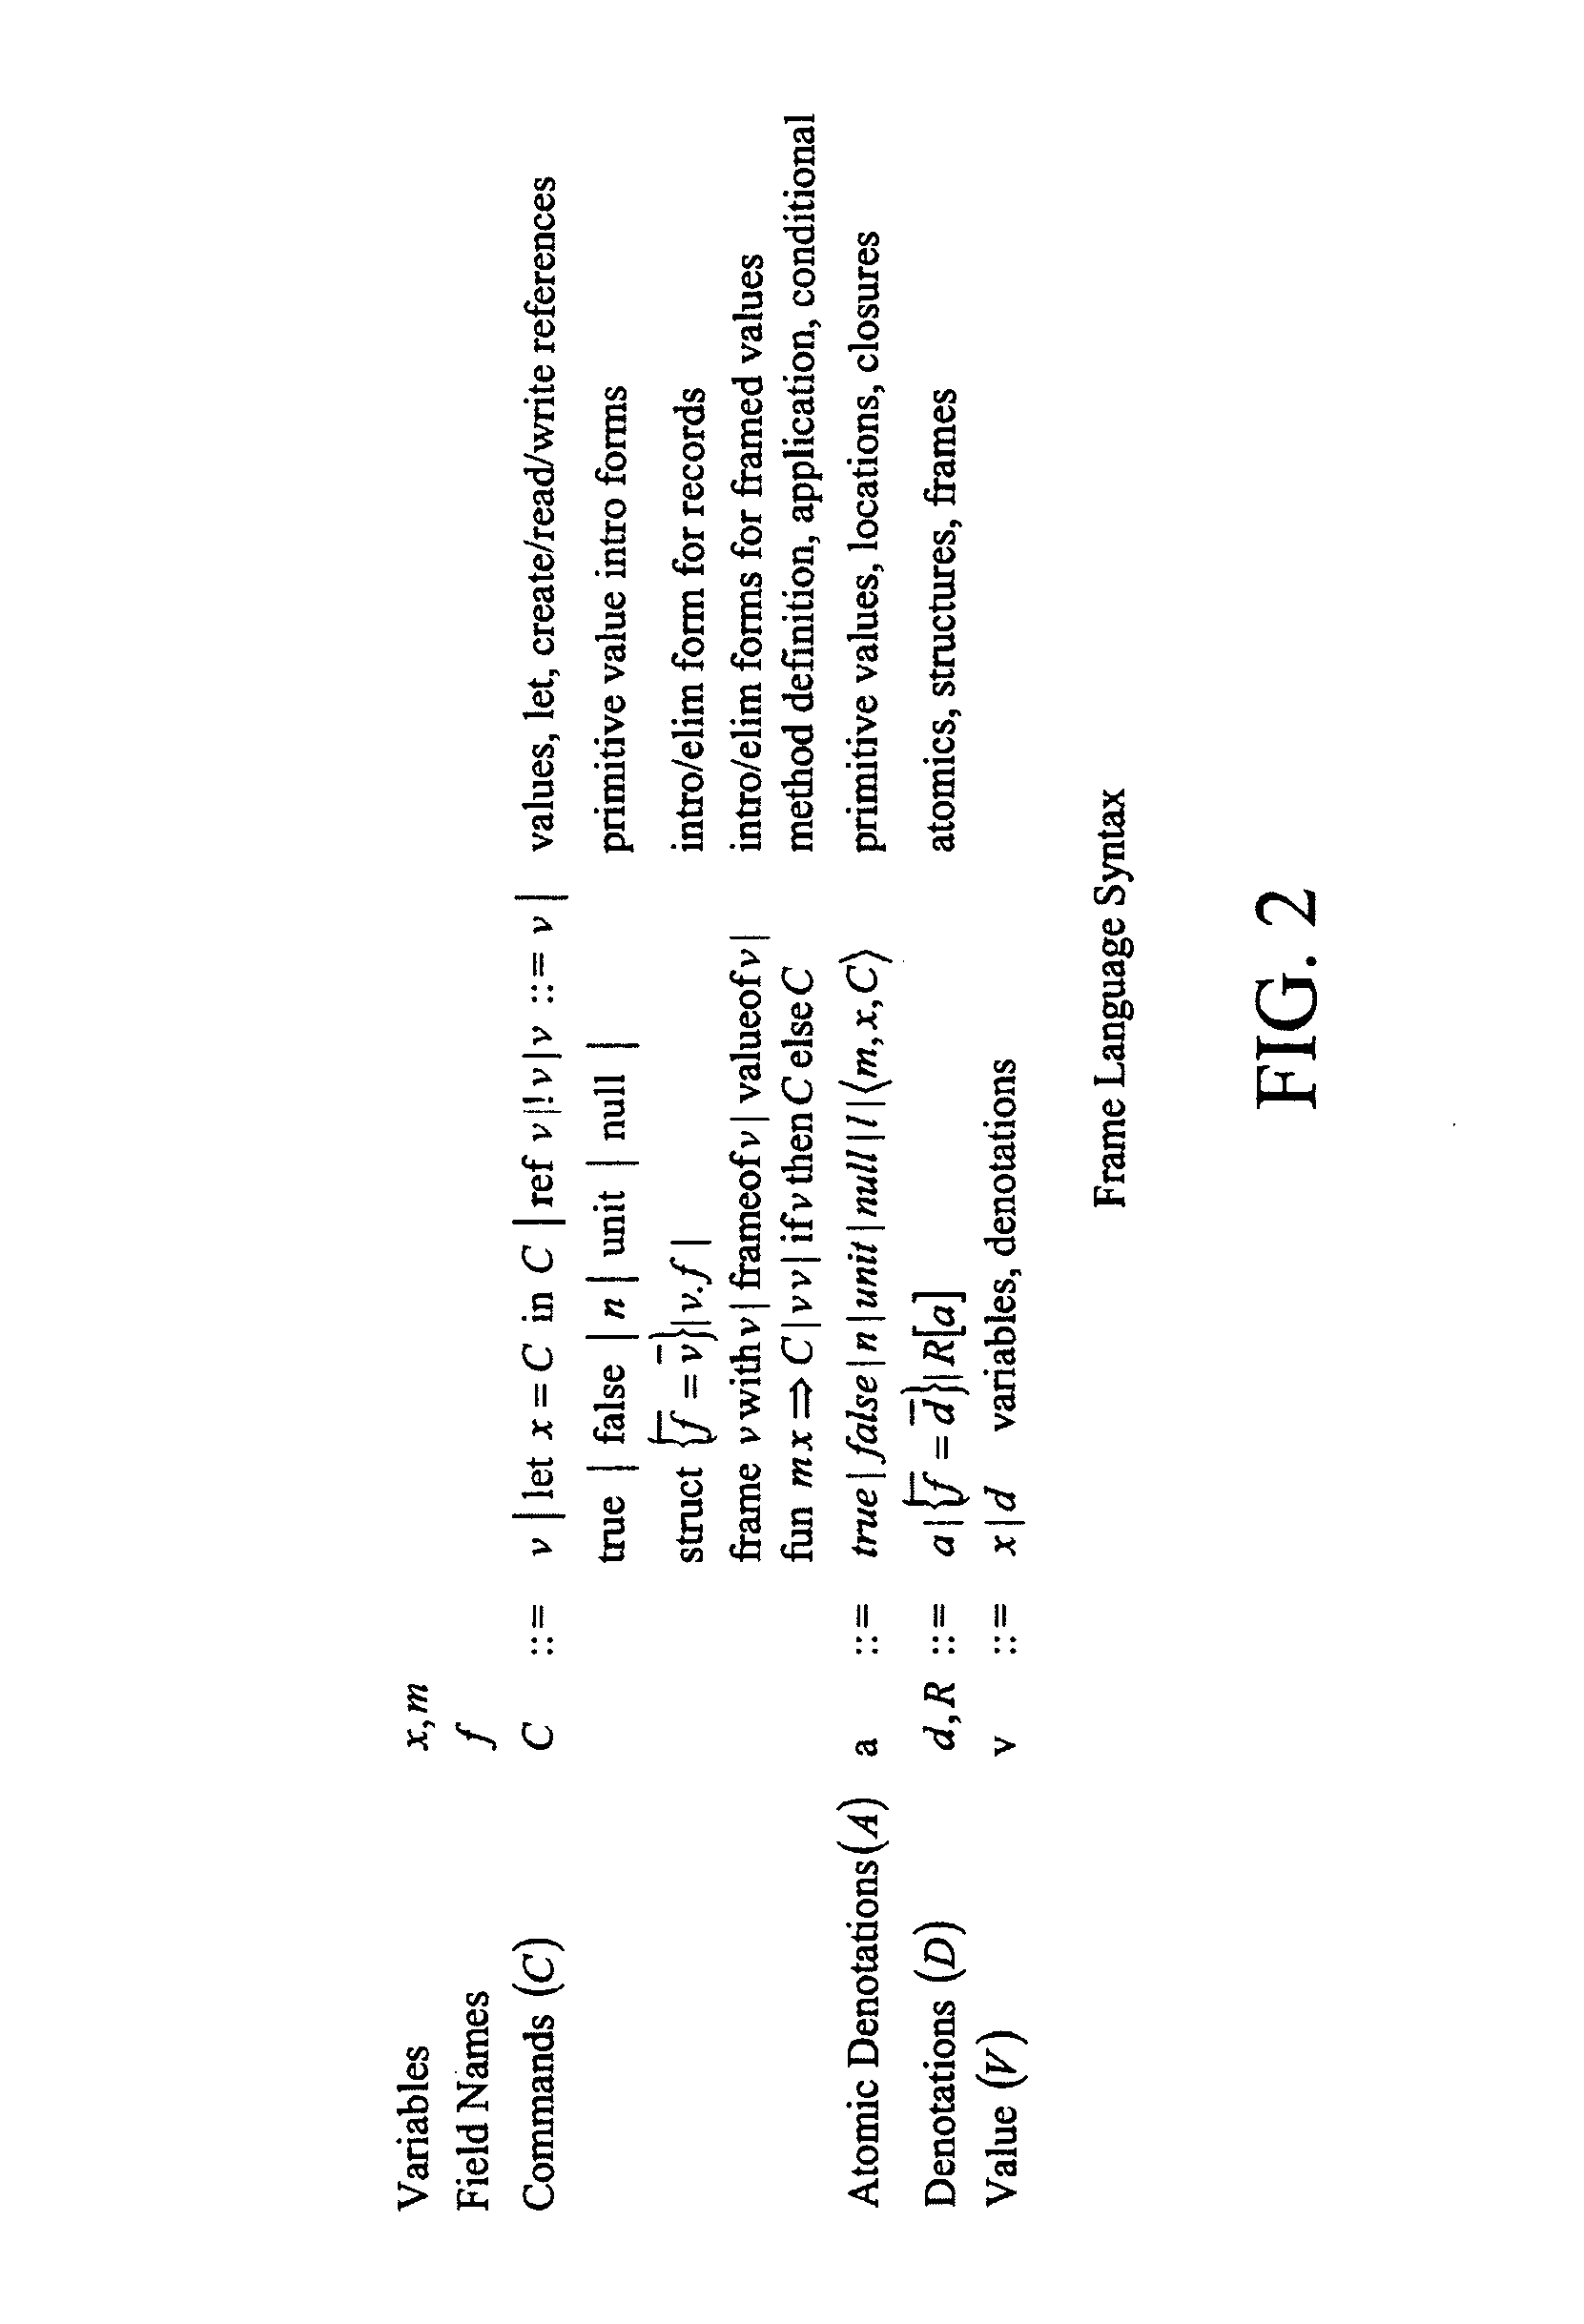 Method for information tracking in multiple interdependent dimensions